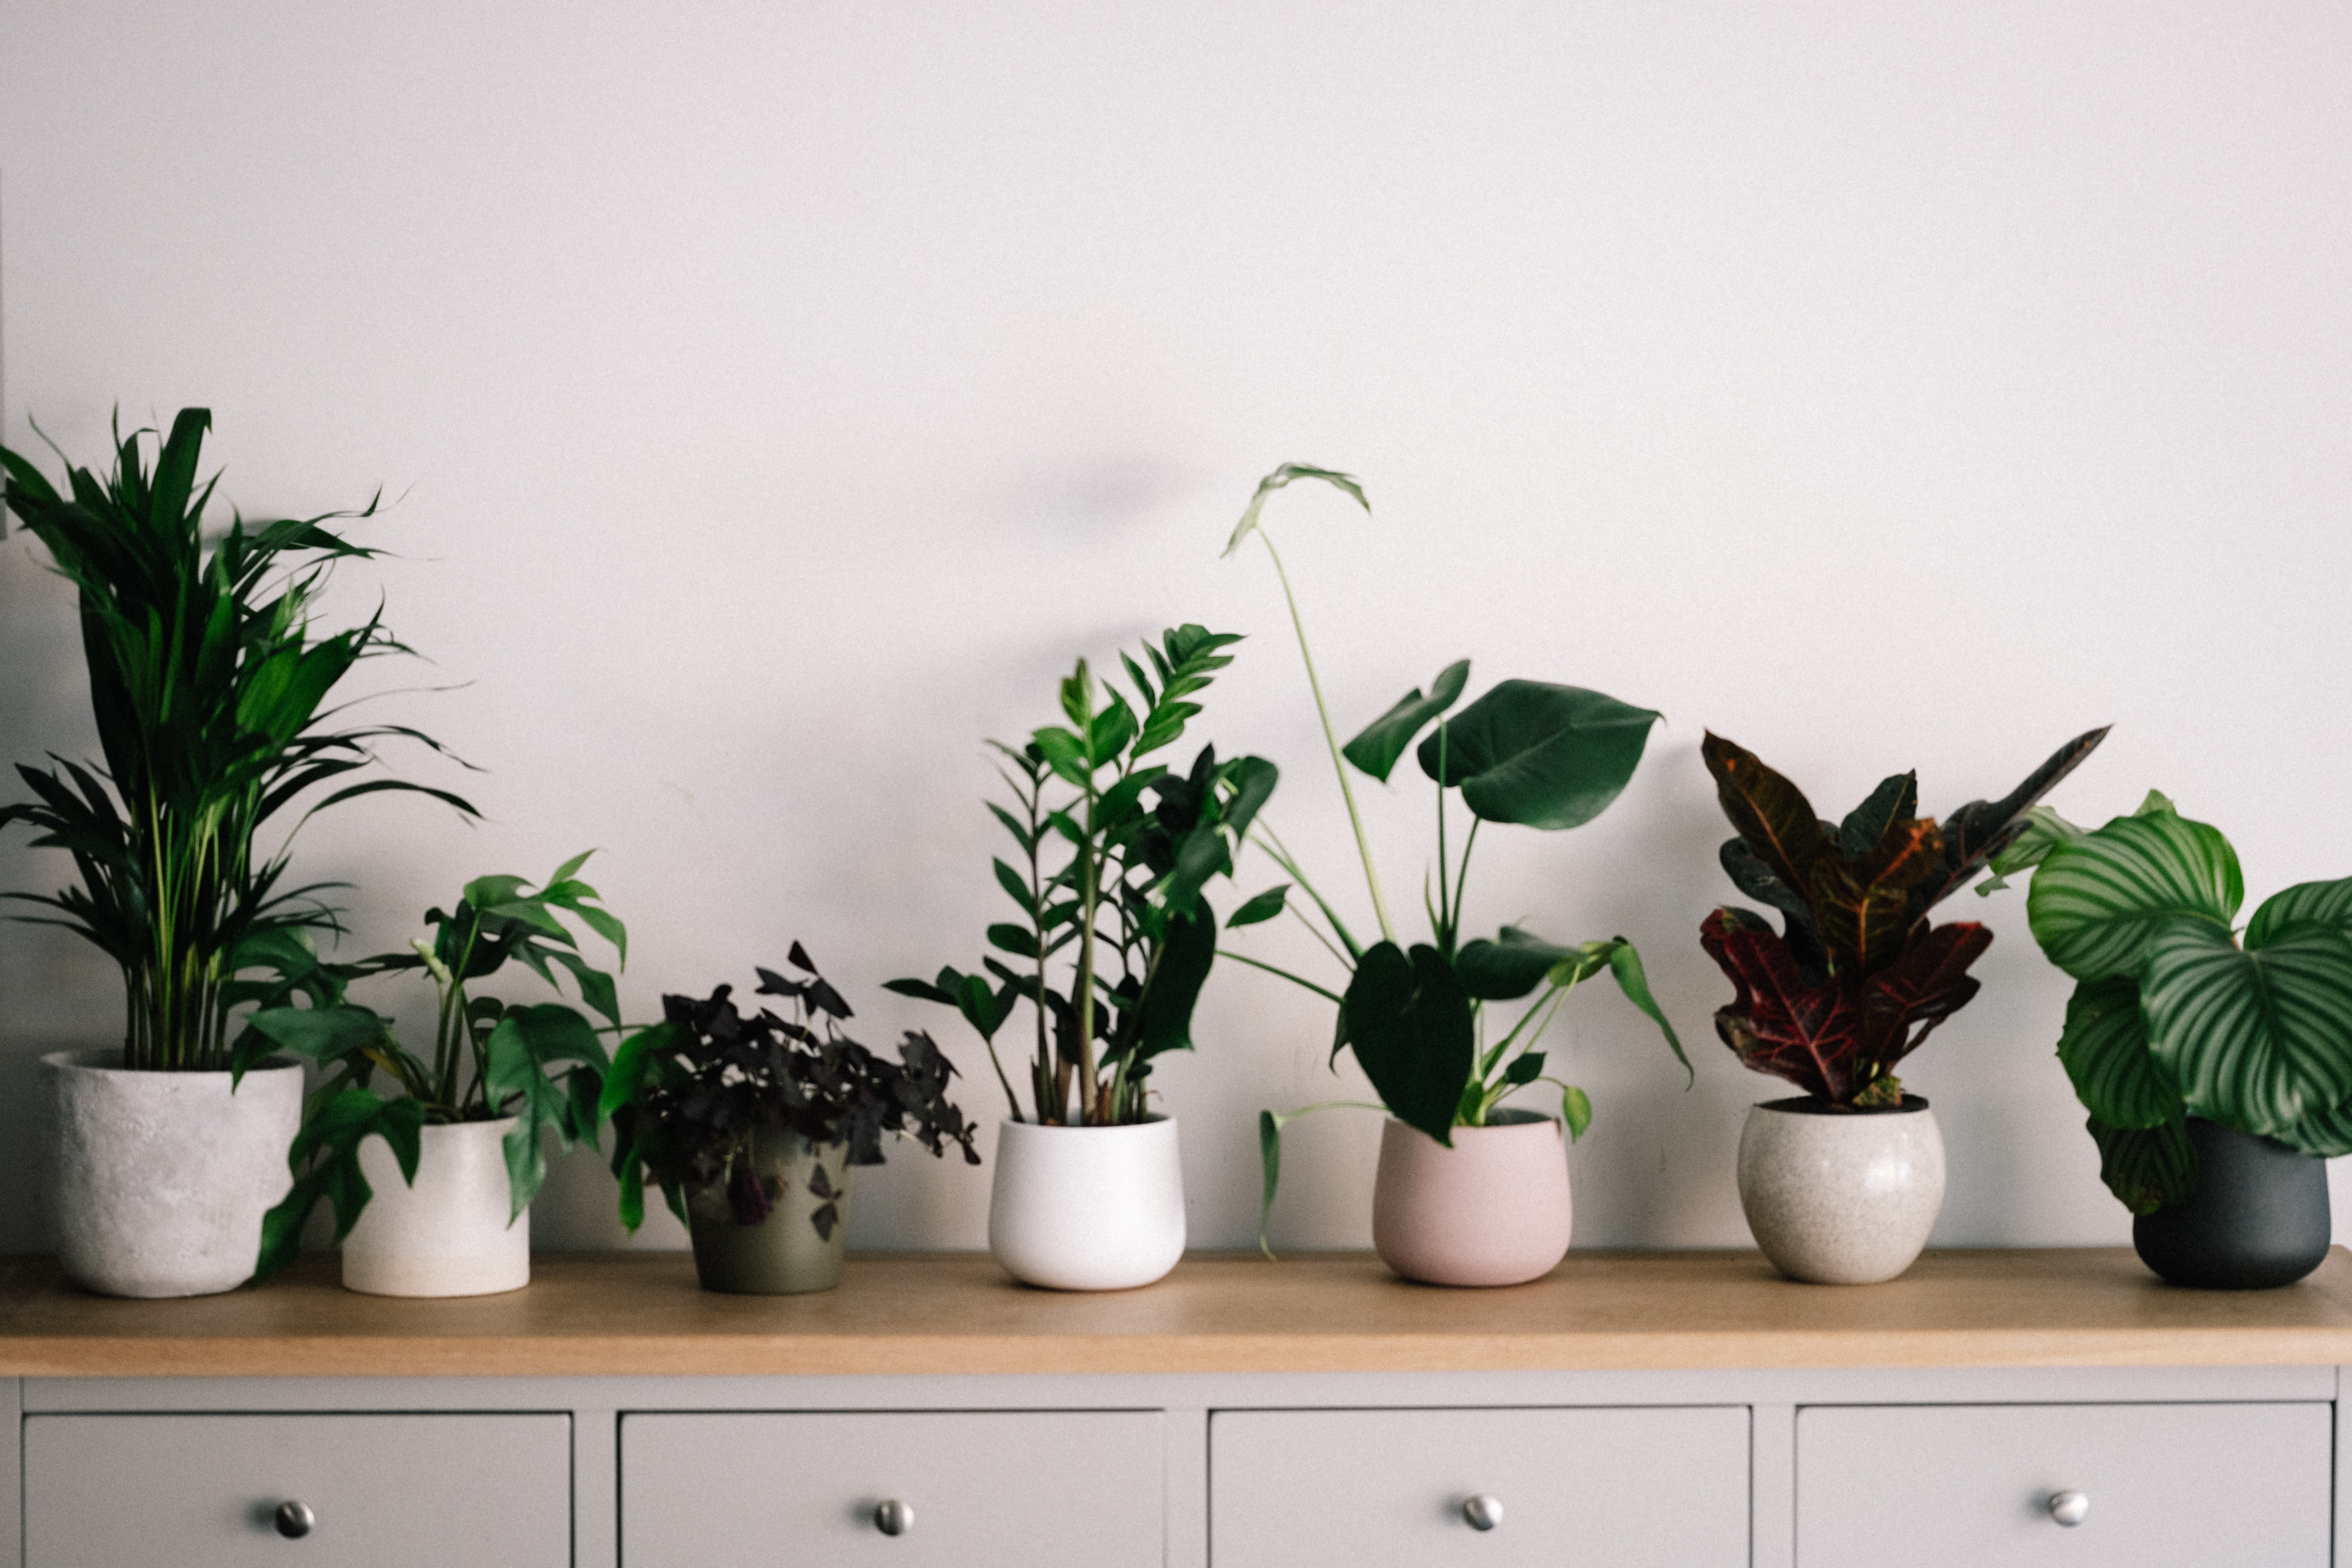 🪴 Getting started with houseplants